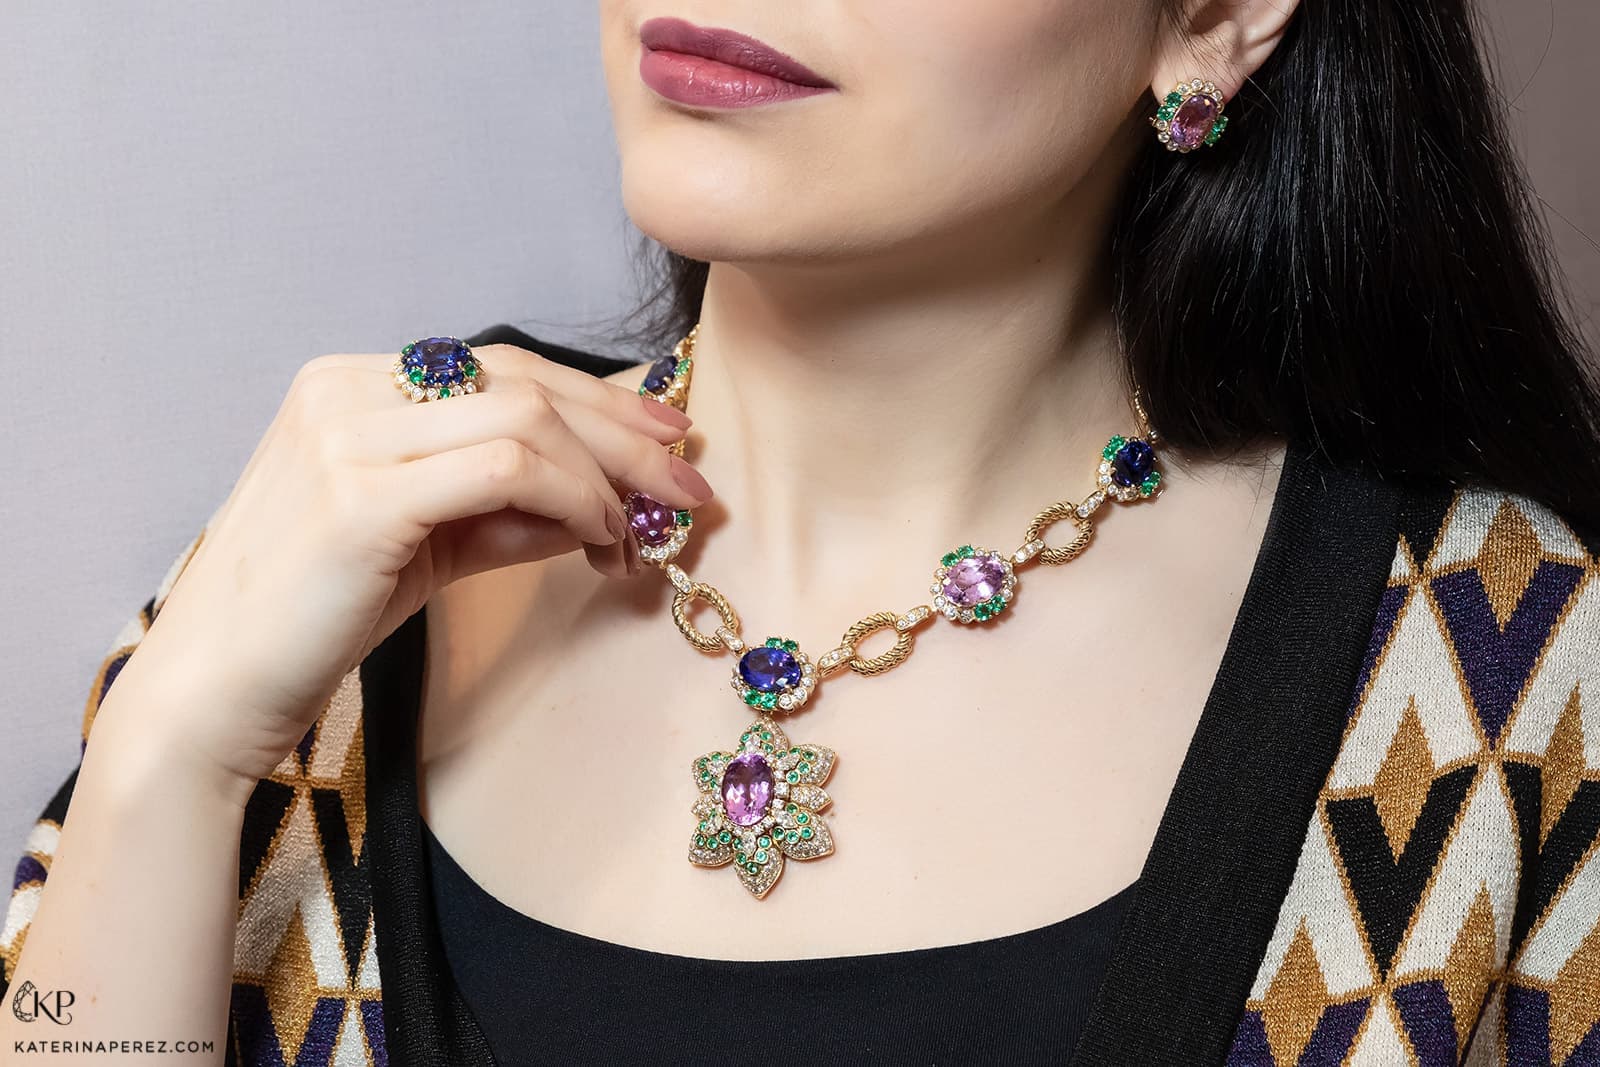 Veschetti 'Ortensia' ring with 7.81ct cushion cut tanzanite, emeralds and diamonds, necklace with an oval 39.05ct kunzite, oval tanzanites totaling 26.62ct, 6.28ct Colombian emeralds, and 14.20ct diamonds, and earrings with 1.38ct oval kunzites, emeralds and diamonds, all in 18k yellow gold